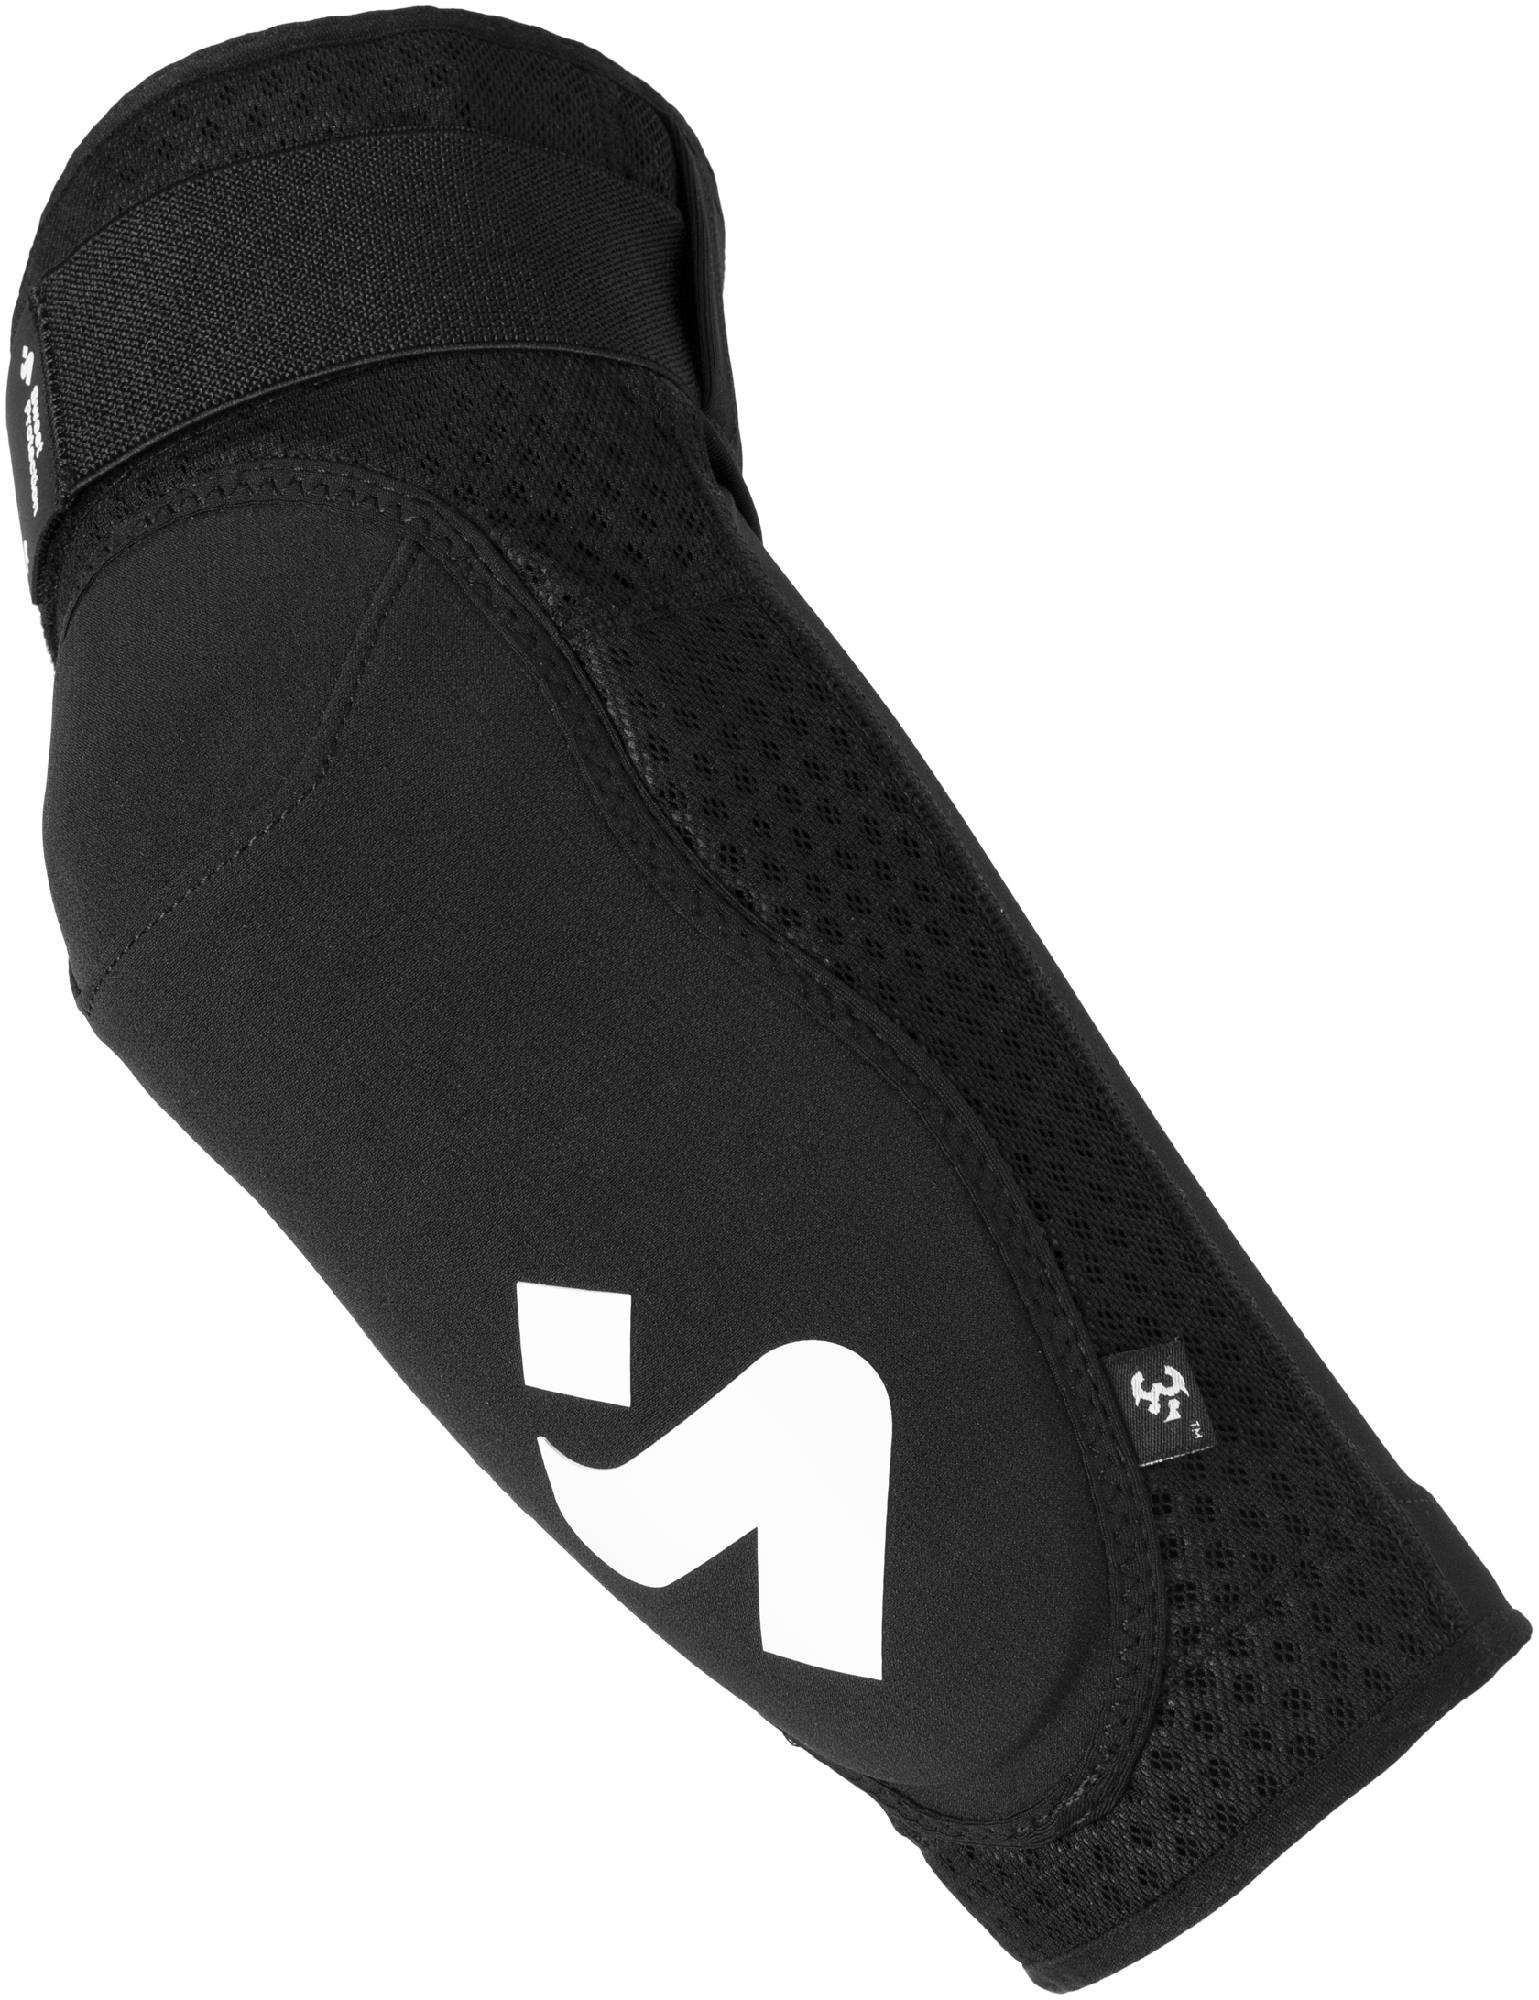 Sweet Elbow Guards Pro